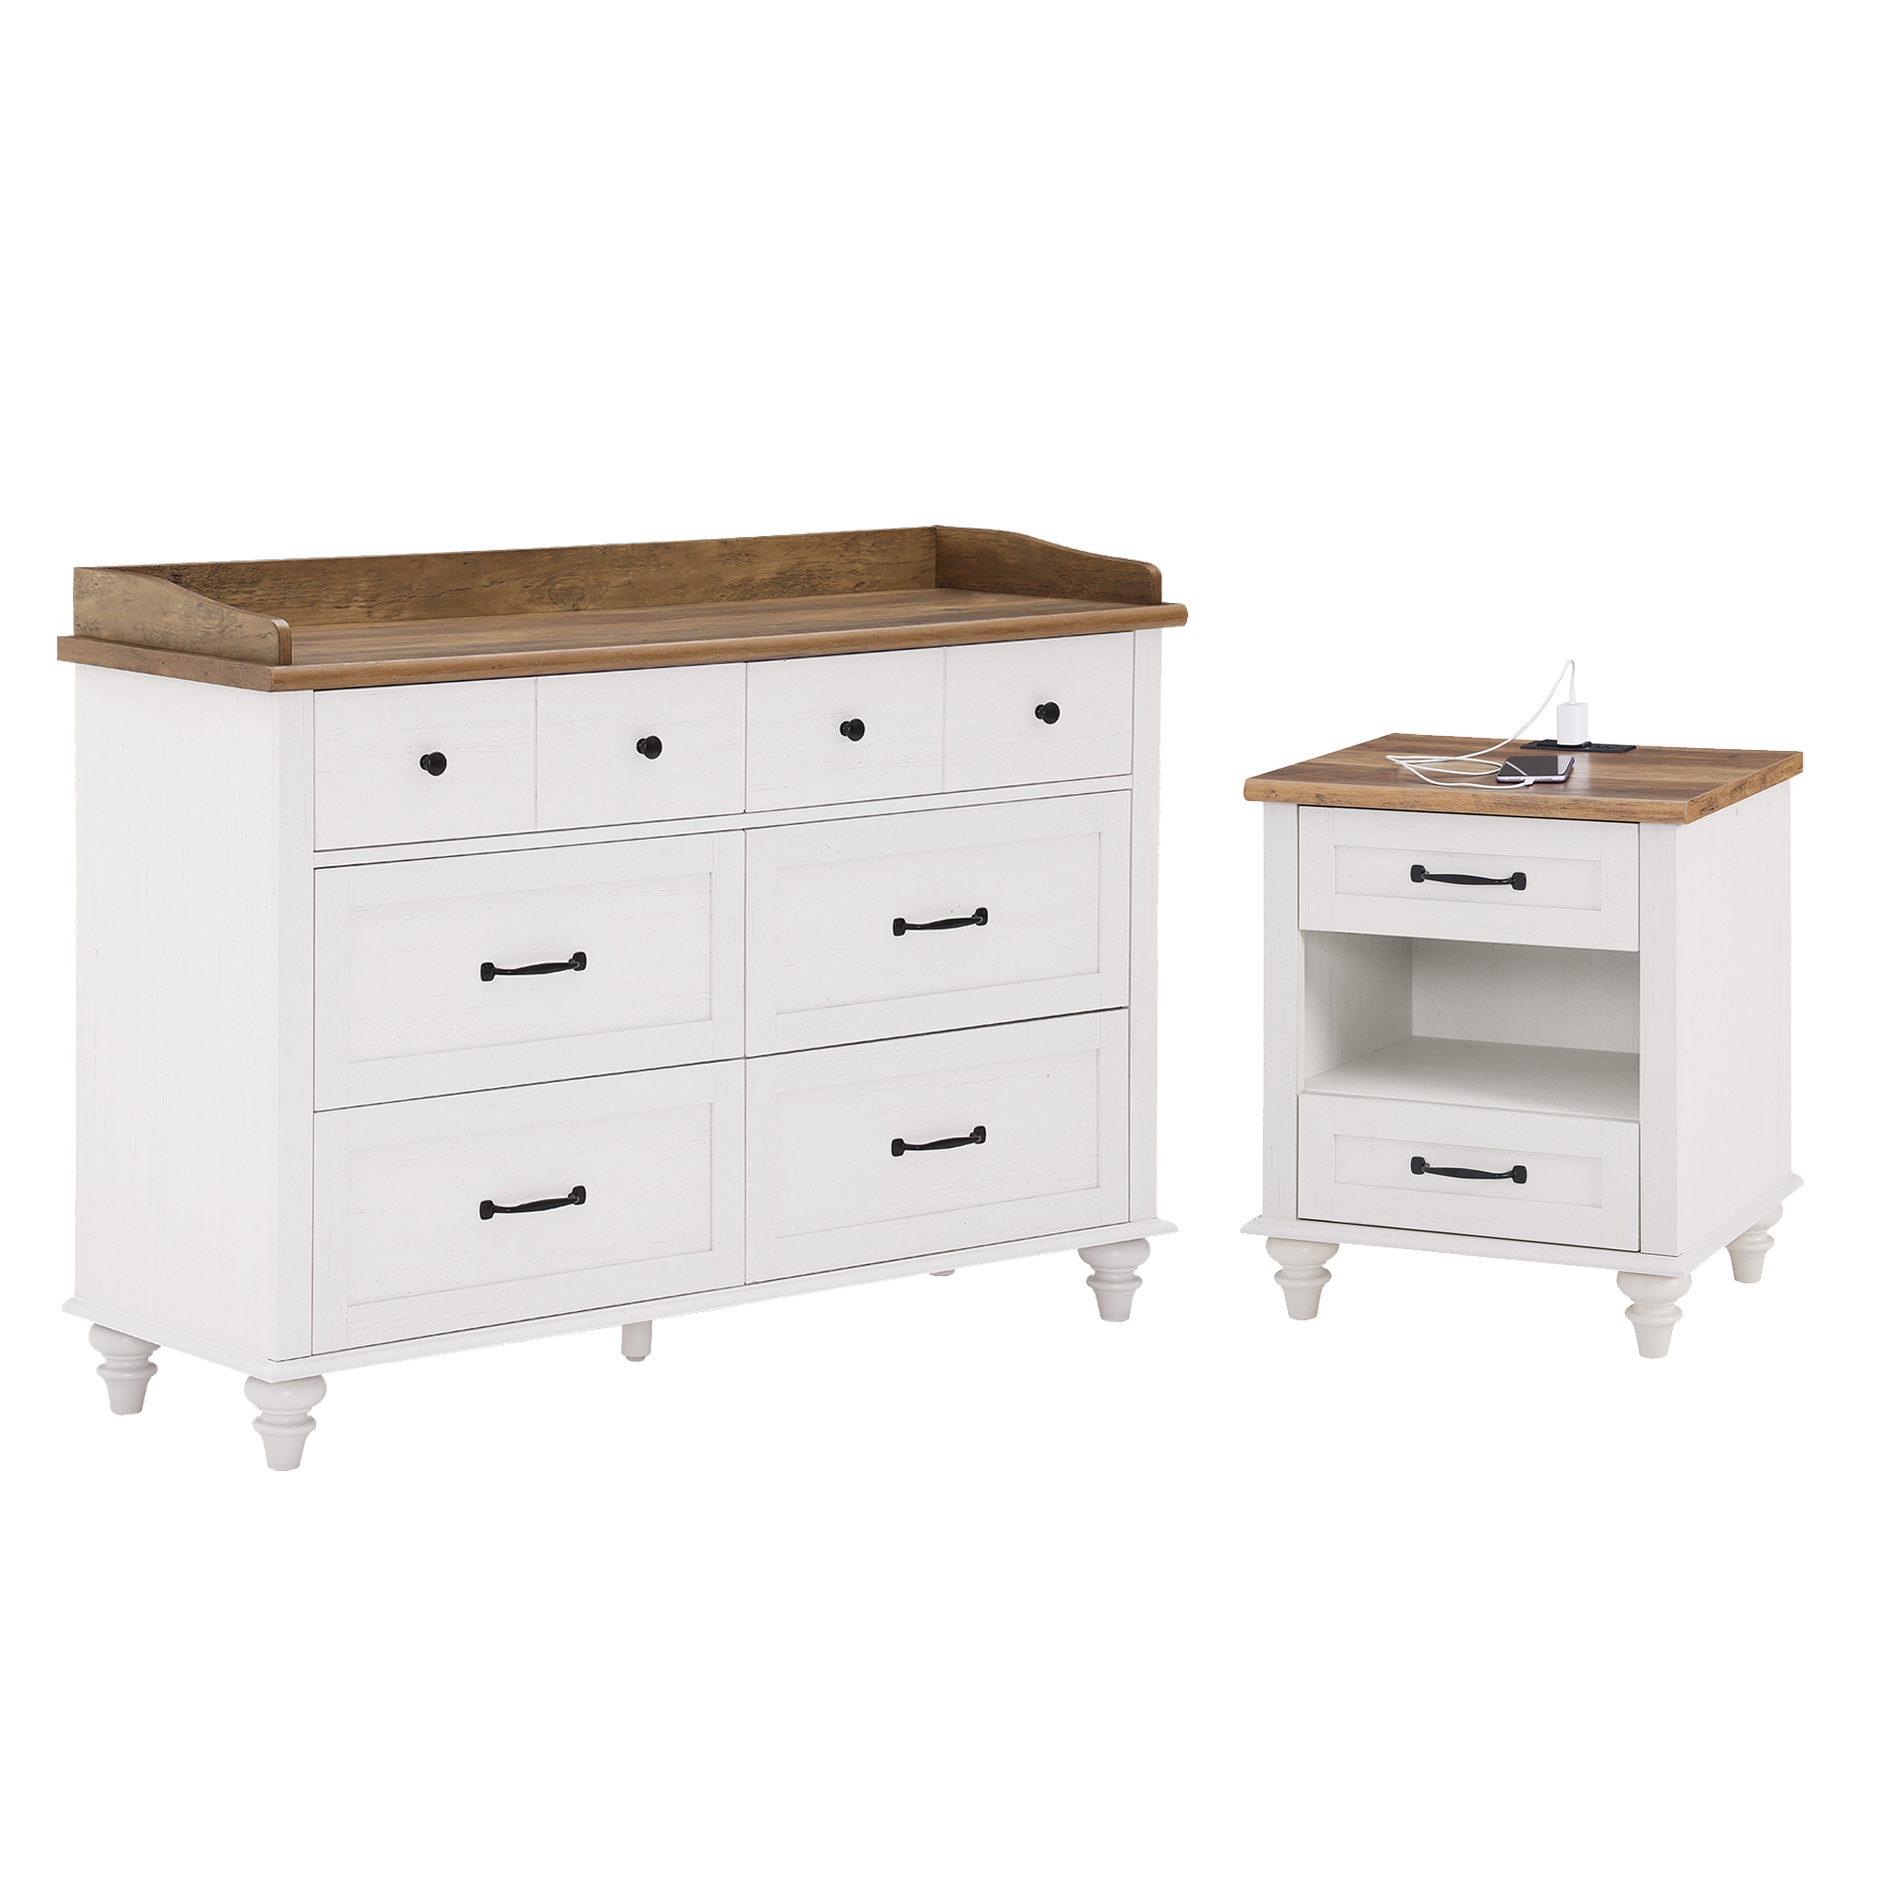 WAMPAT 47" Baby Dresser Changing Table for Nursery, White